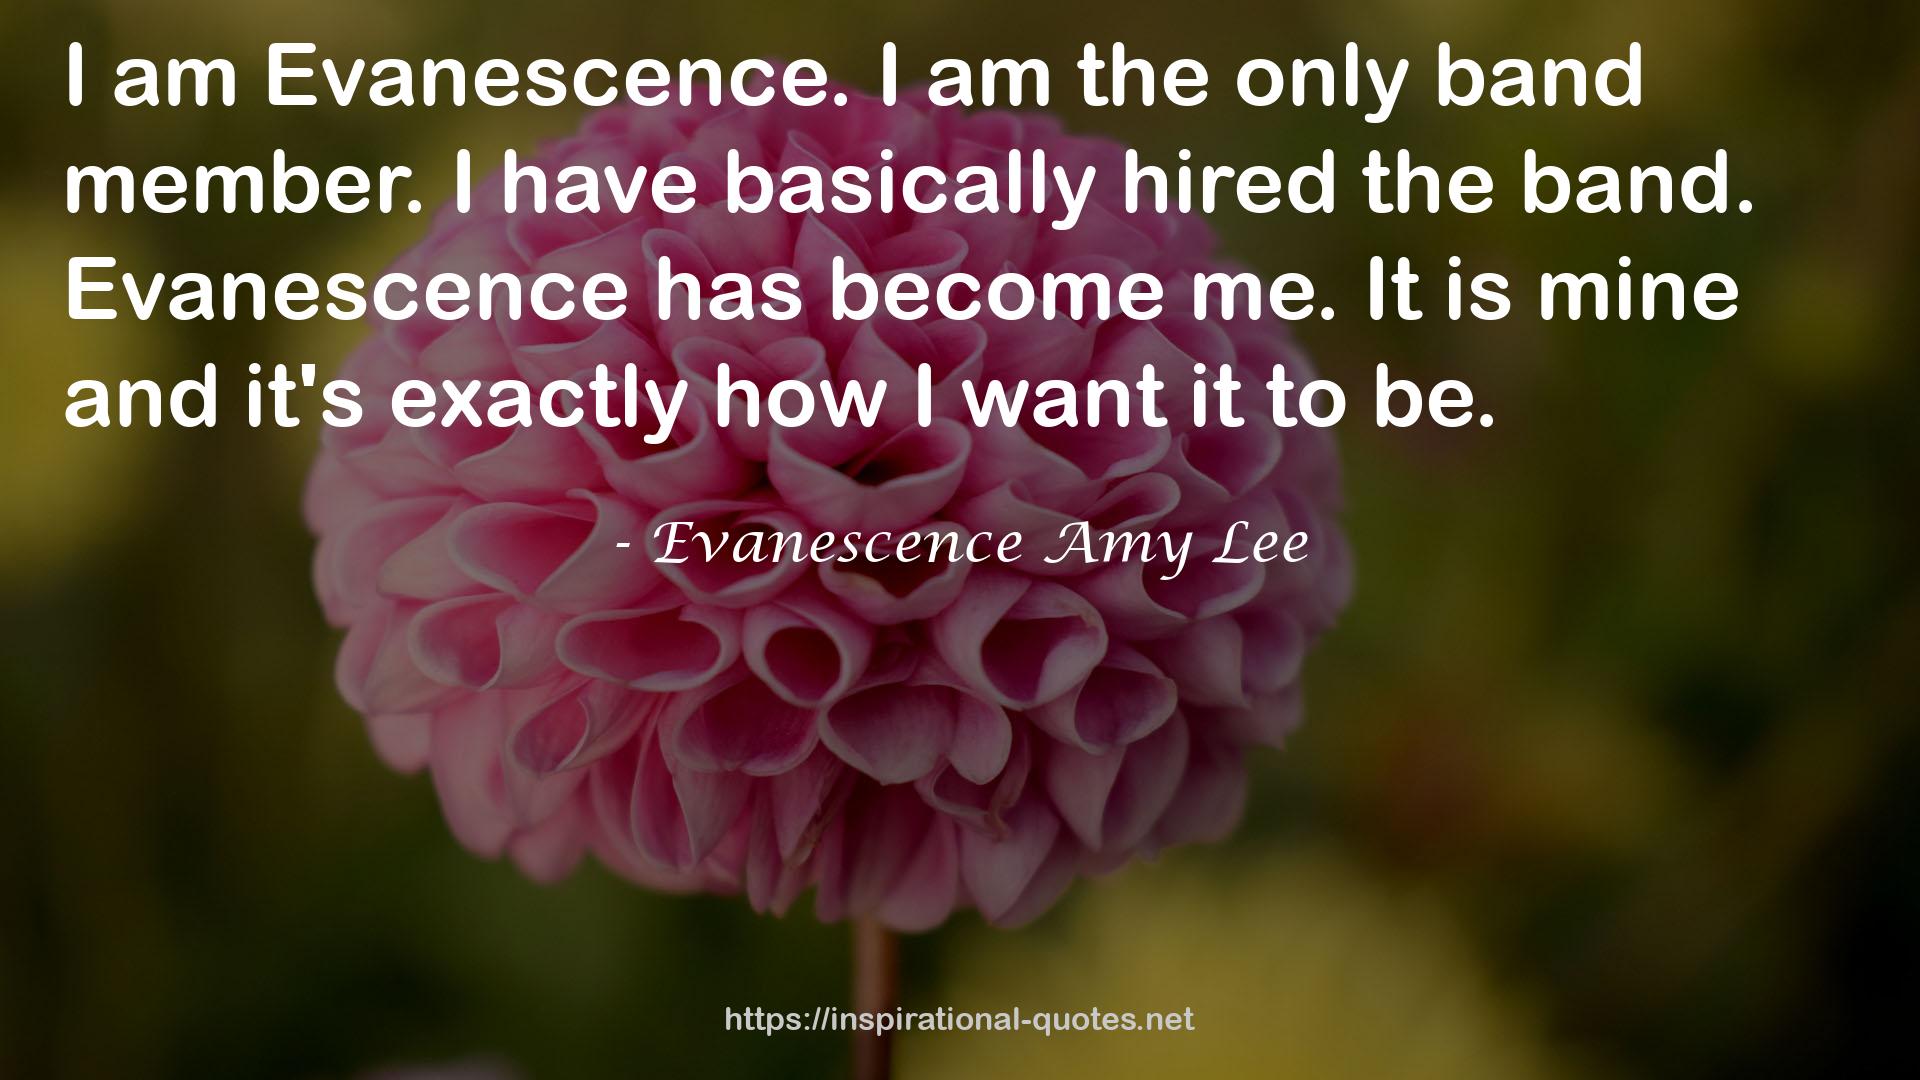 Evanescence Amy Lee QUOTES